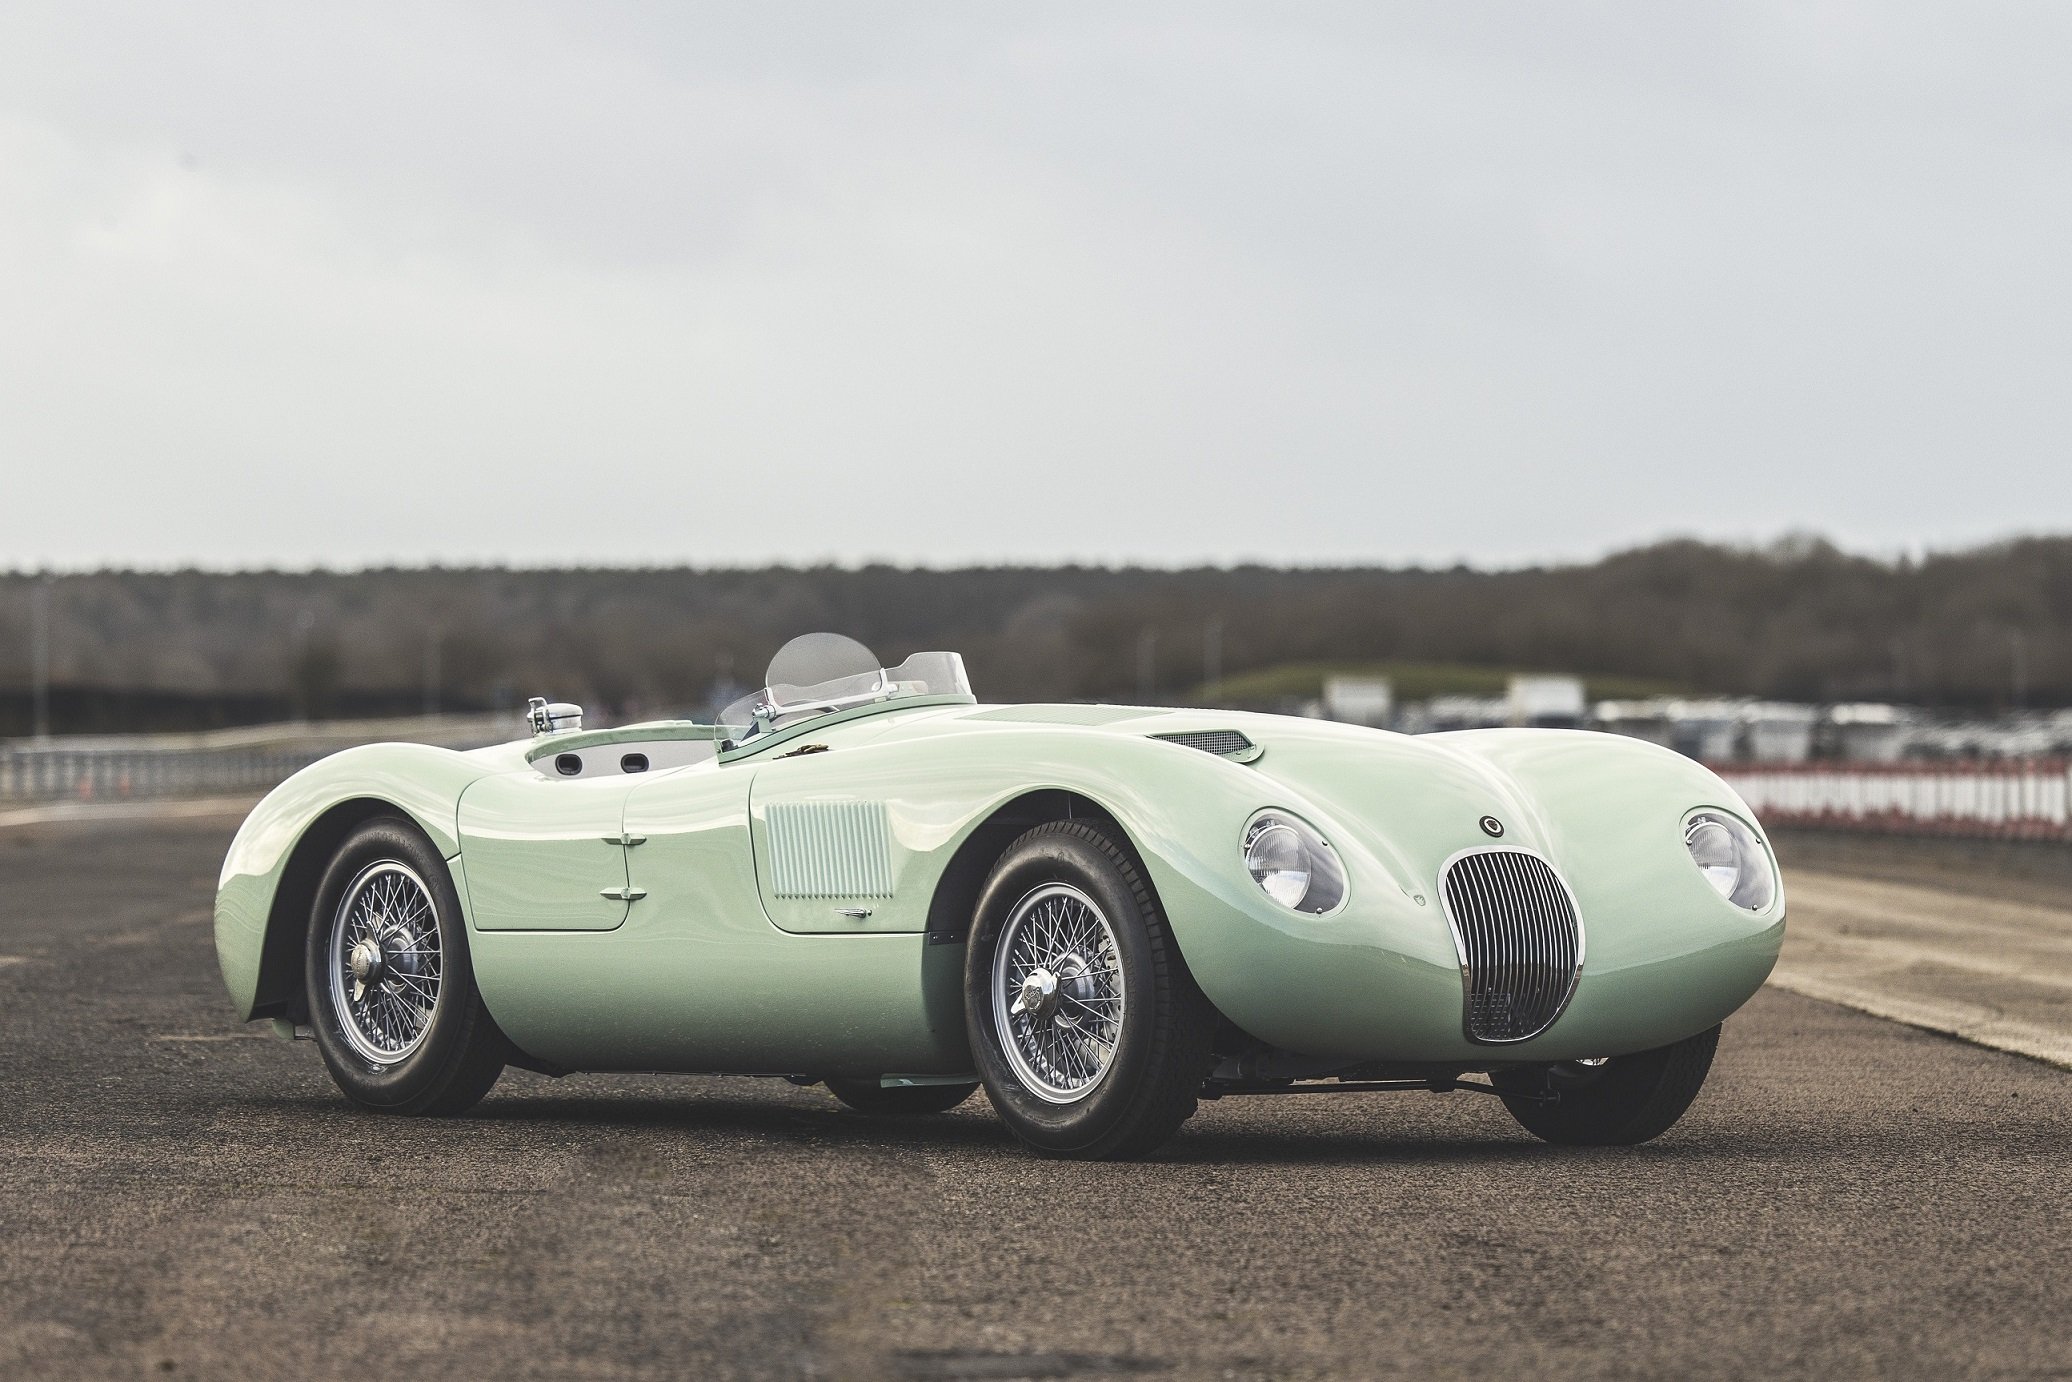 First Production of Jaguar C-type Continuation ready for customer delivery on landmark anniversary